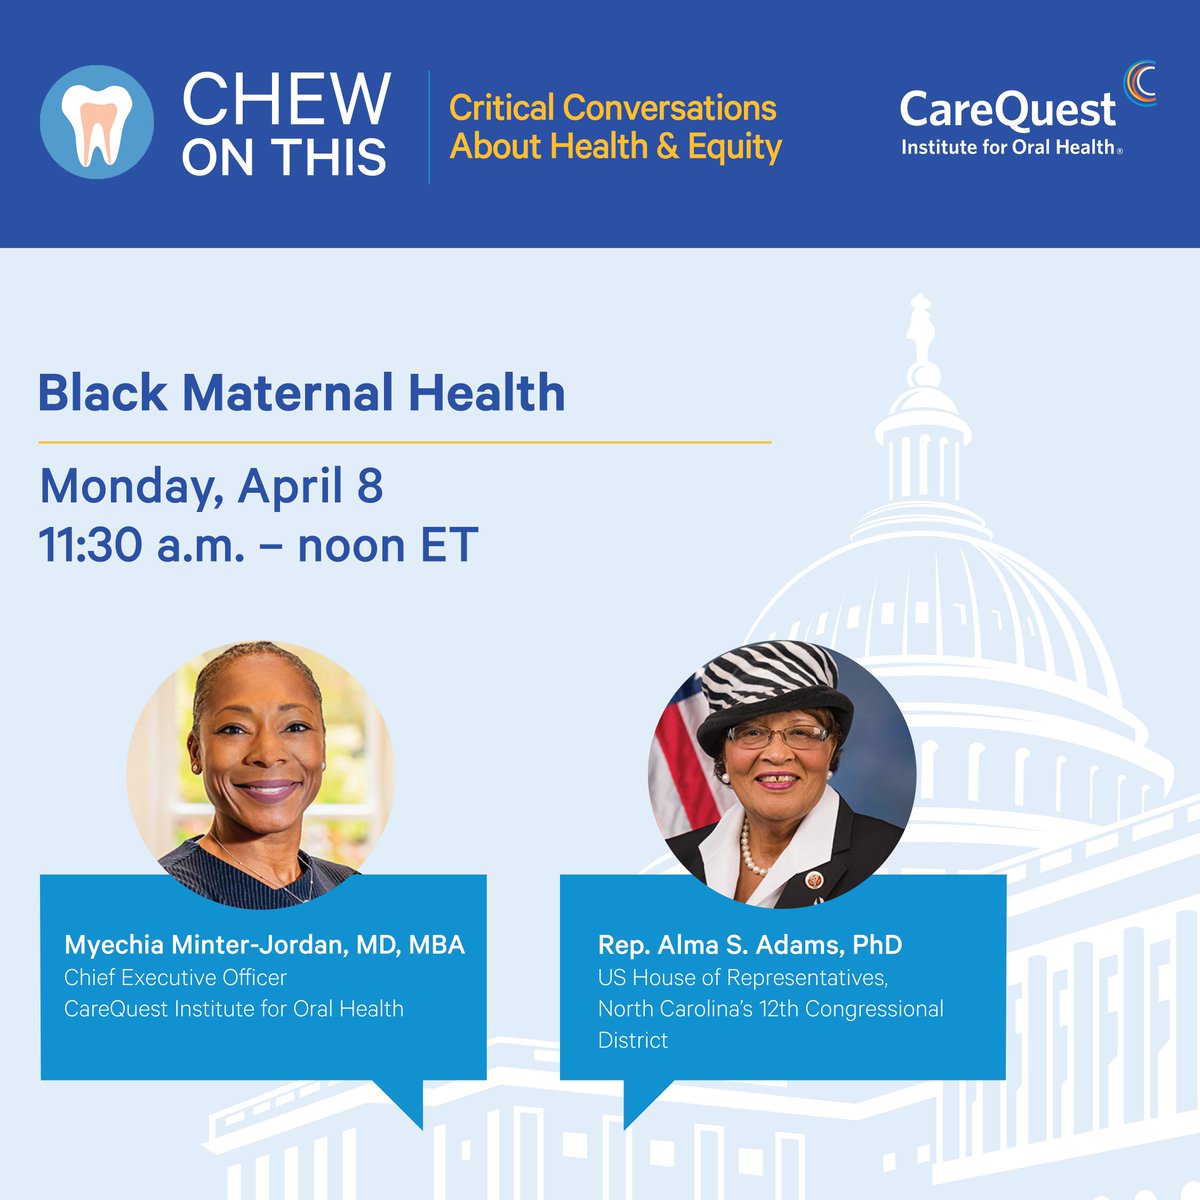 Tune in live TODAY at 11:30 a.m. to listen to CareQuest Institute President and CEO Myechia Minter-Jordan, MD, MBA, and @RepAdams, PhD (NC-12), discuss the intersection of #oralhealth and Black maternal health. Register: ow.ly/4qn250R1sGP